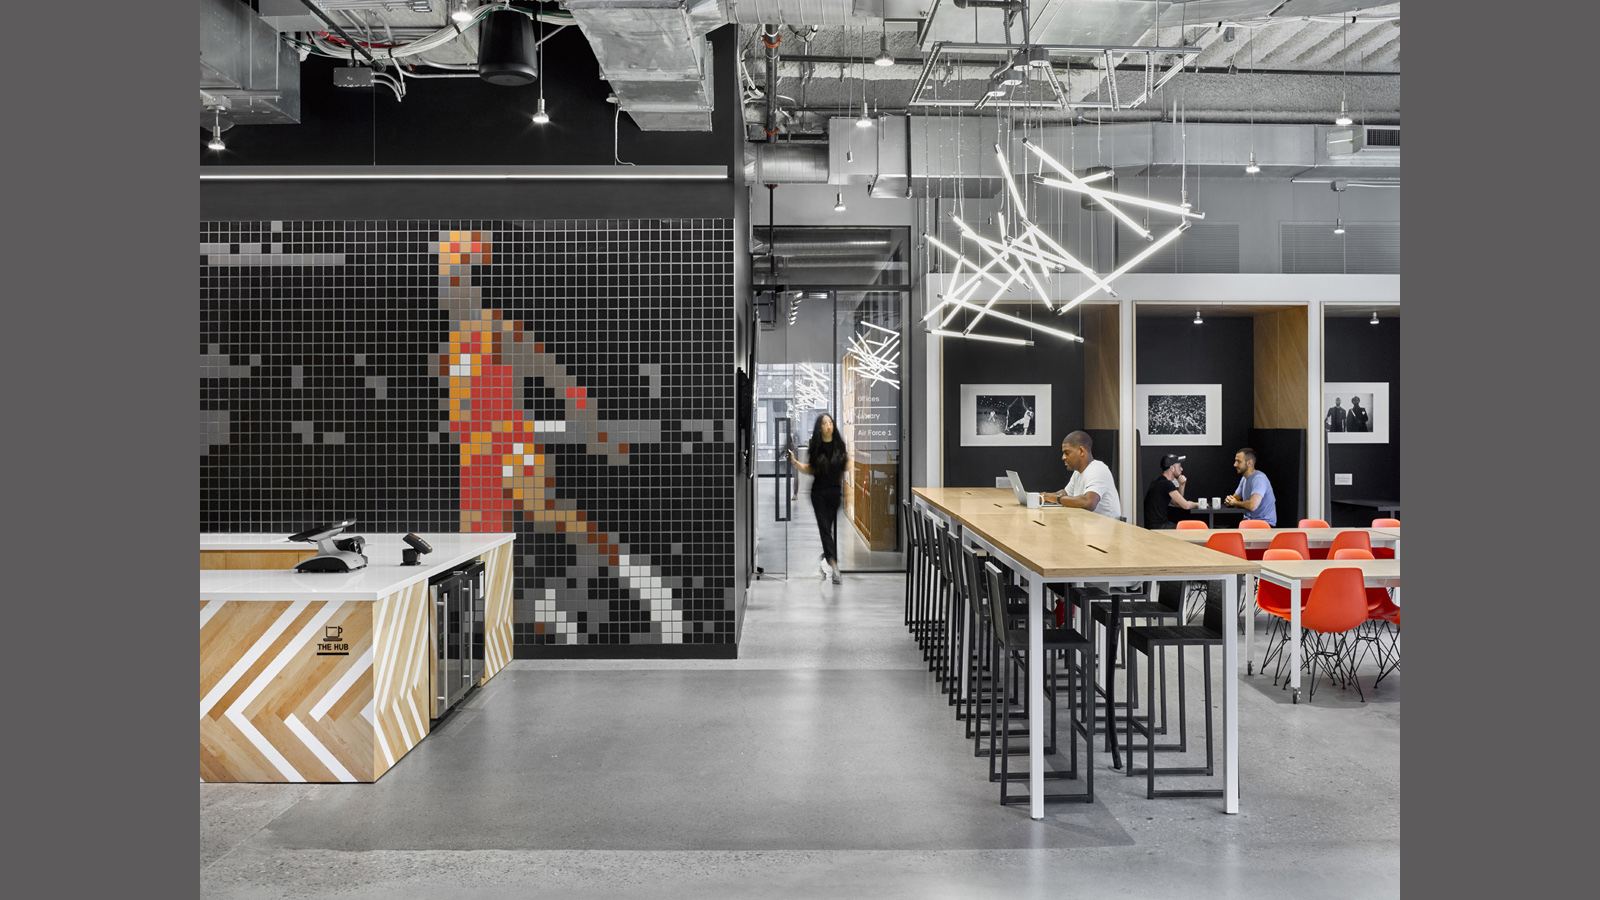 Nike Nyc Headquarters Interior, an 8bit mural of Michael Jordon is on the wall